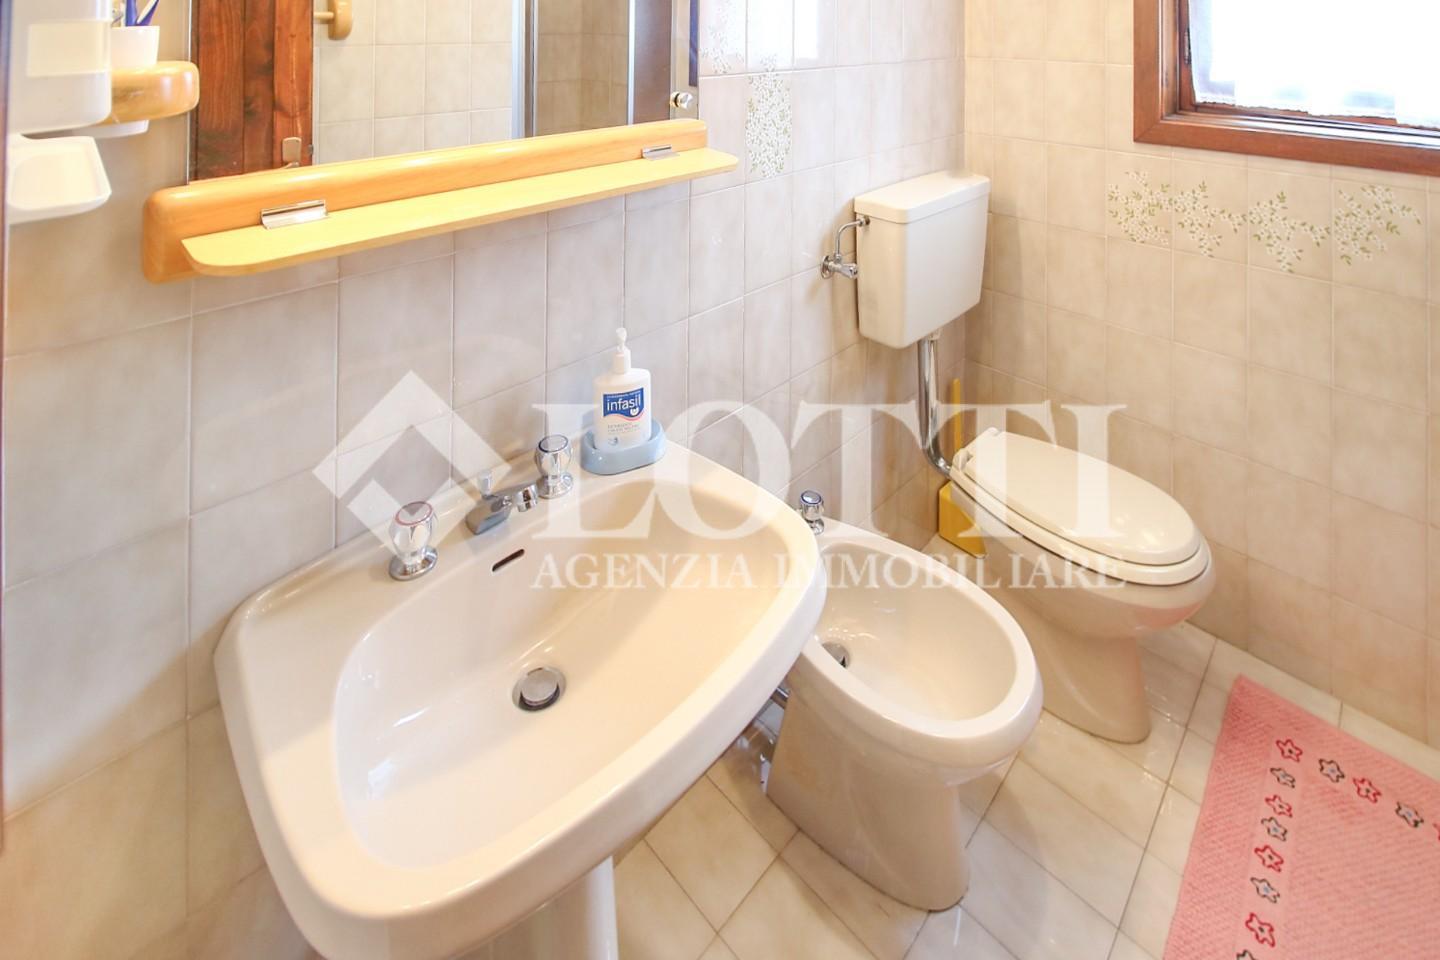 Apartment for sale, ref. 844